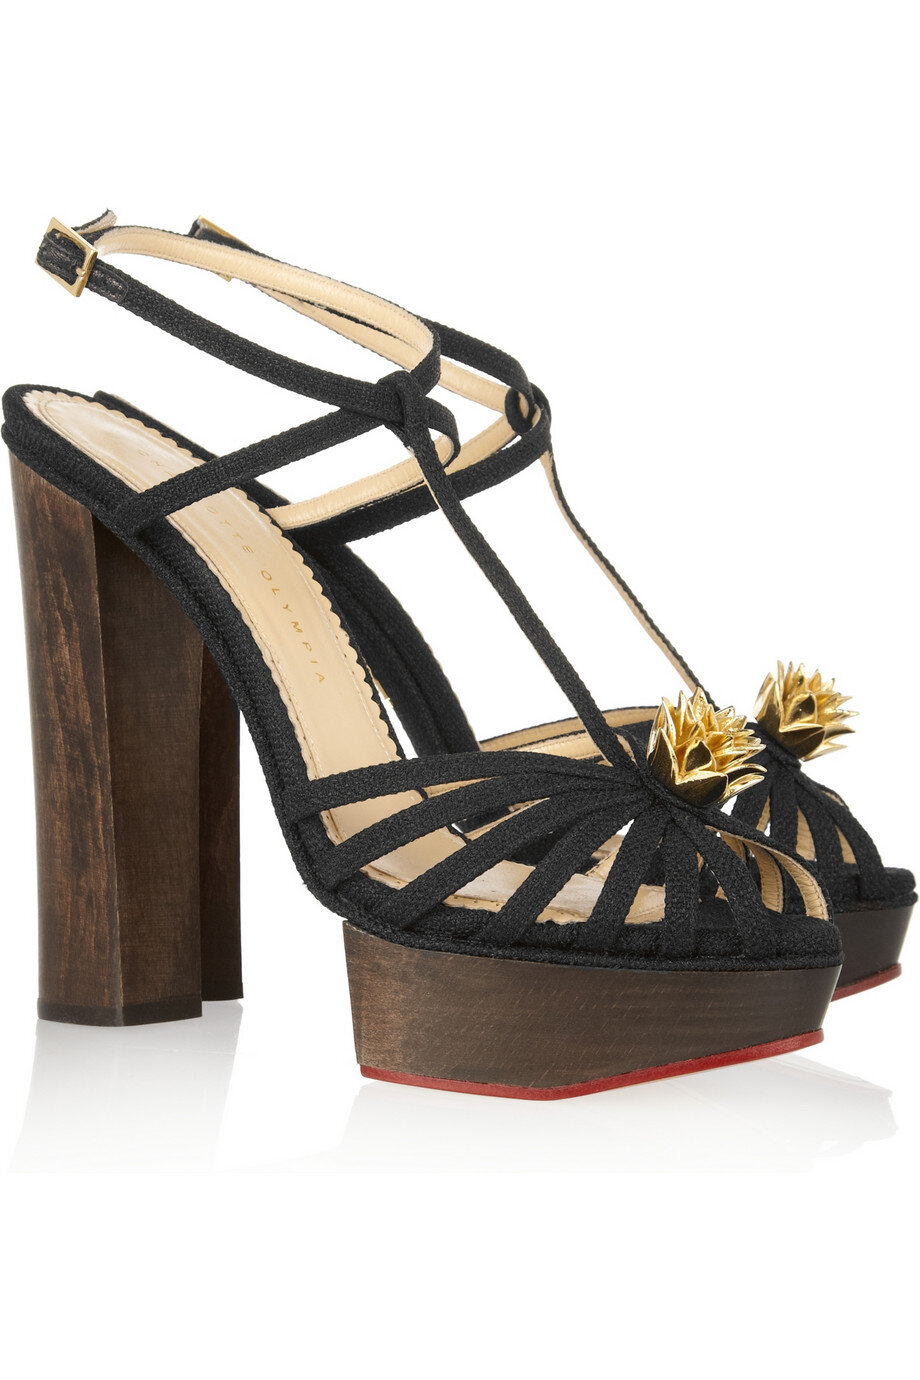 Charlotte Olympia Rio Woven Canvas Sandals in Black.jpg